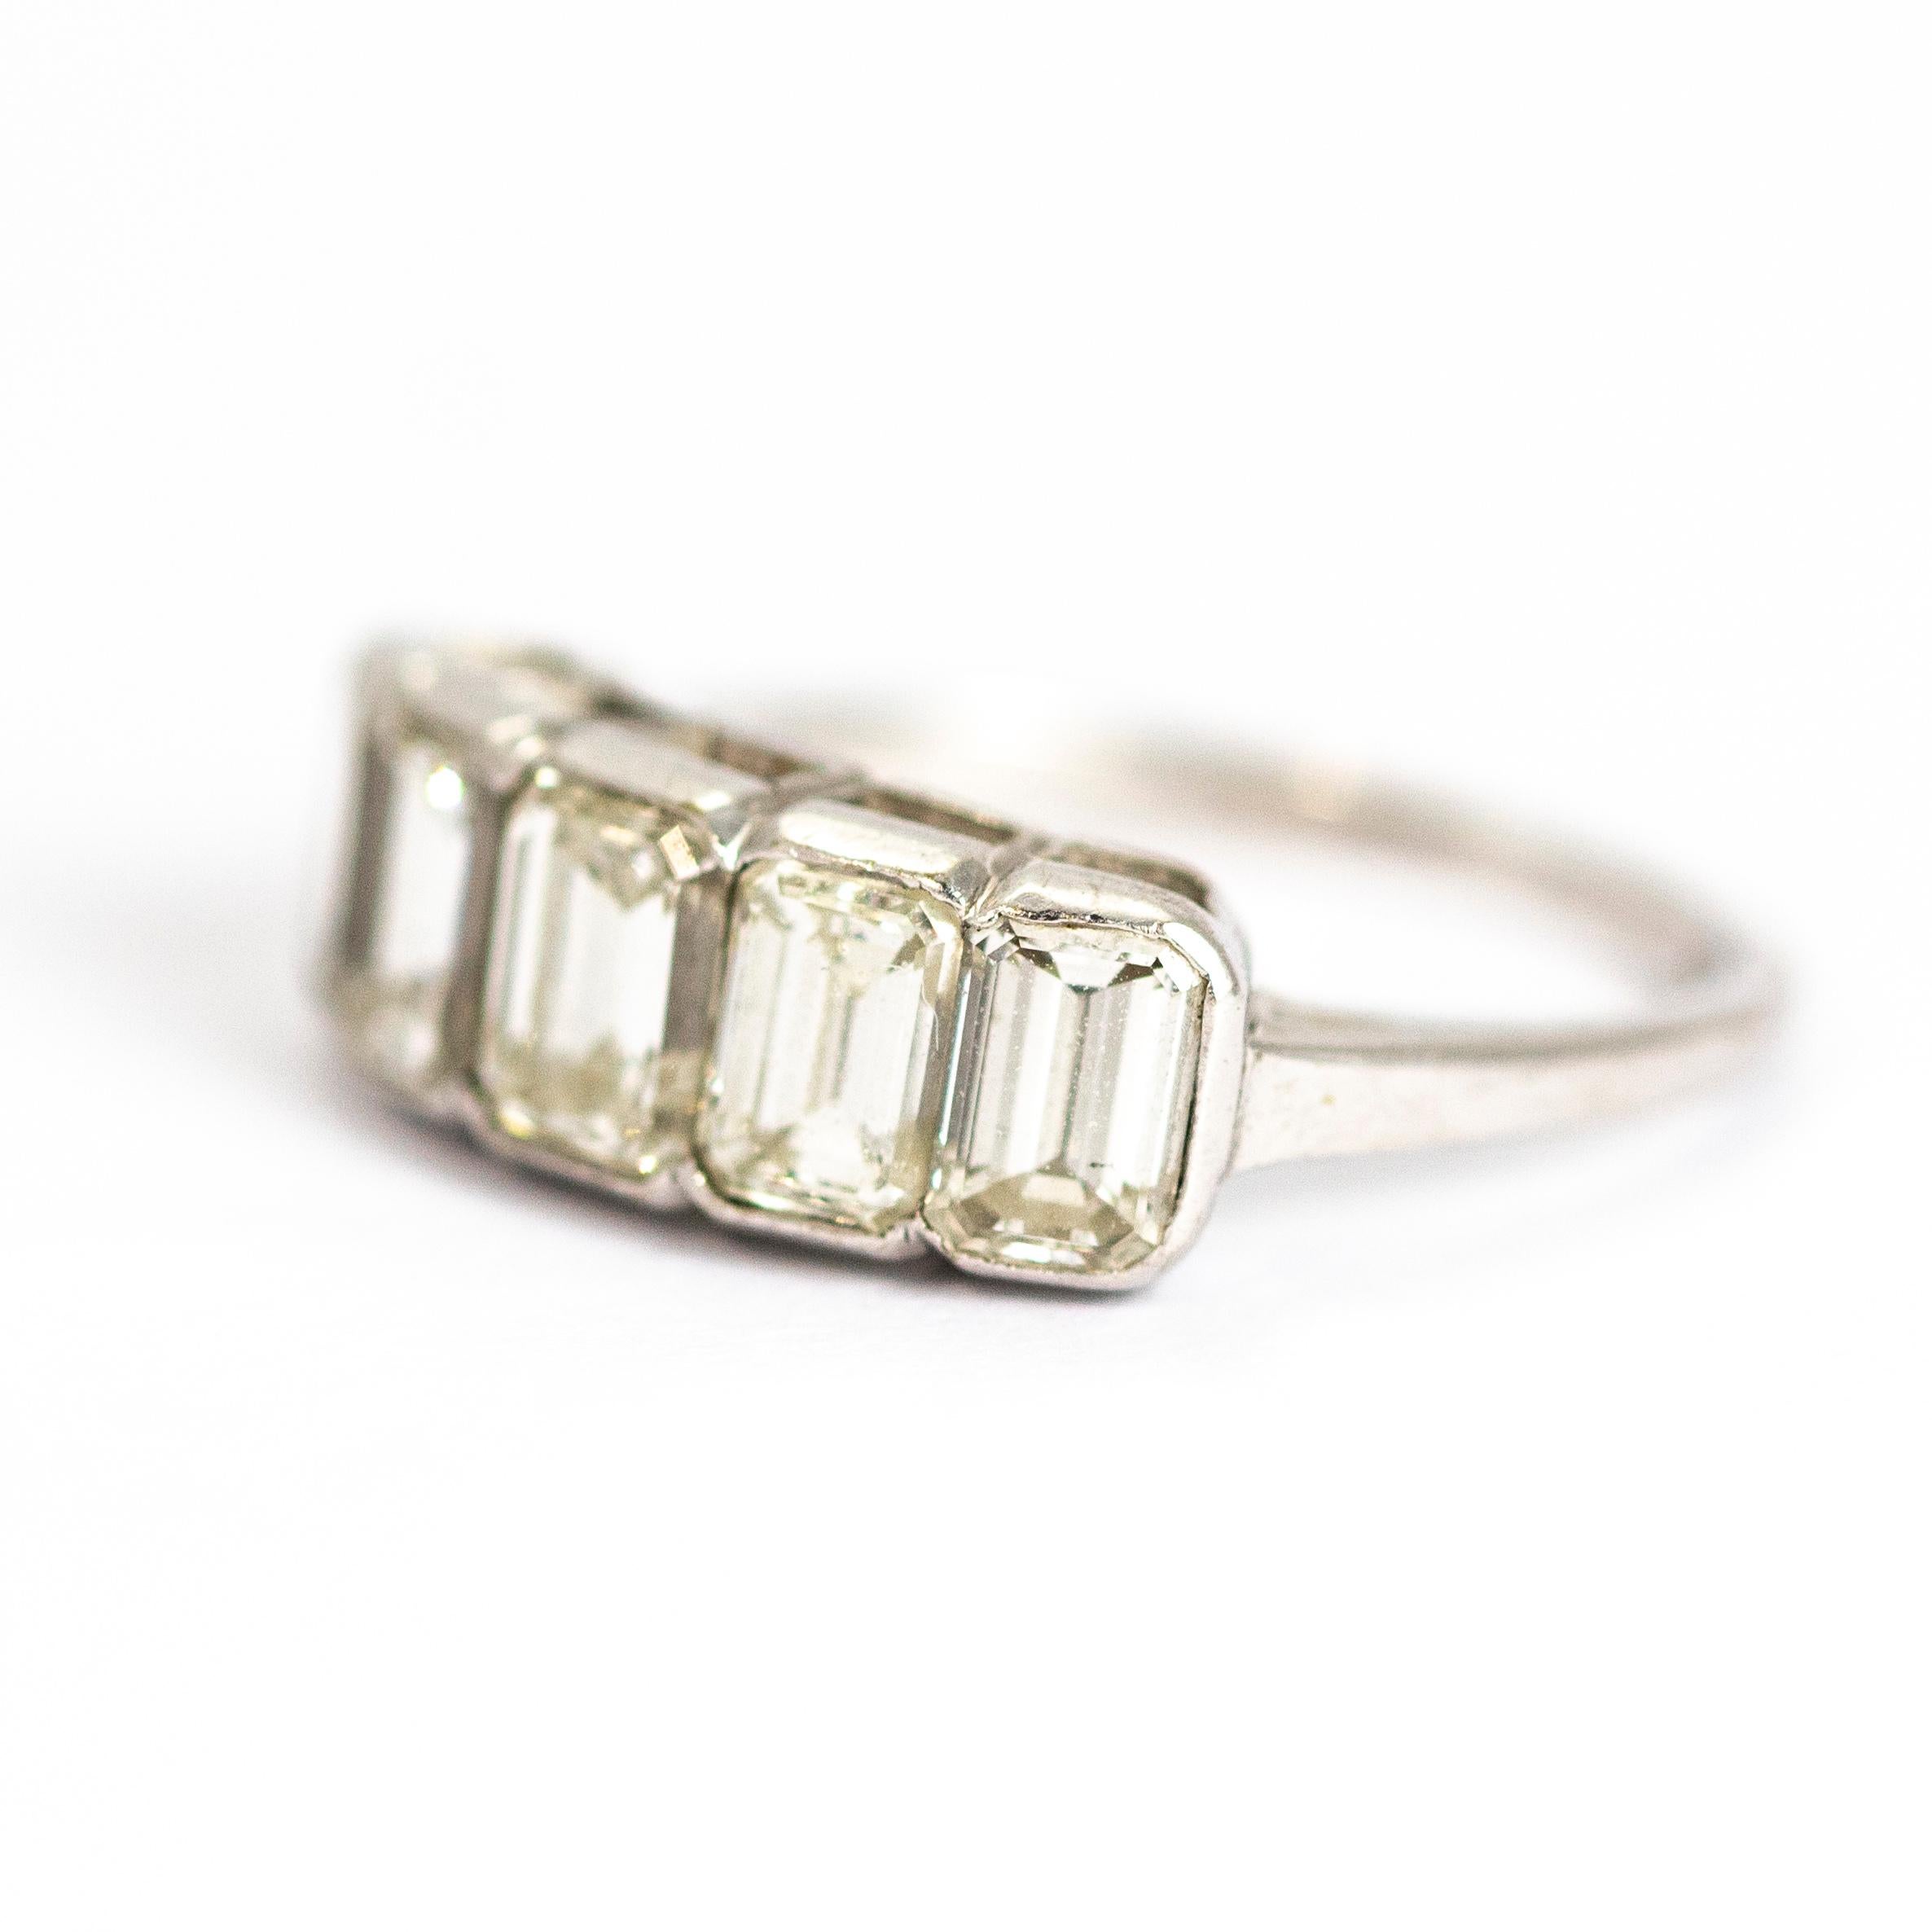 The emerald cut diamonds perched on top of this 18ct white gold band are exquisite. The 'hall of mirrors' effect in the stones really is mesmerising. The ring holds five stones in total, the centre stone measuring 50pts, the next stone down in size